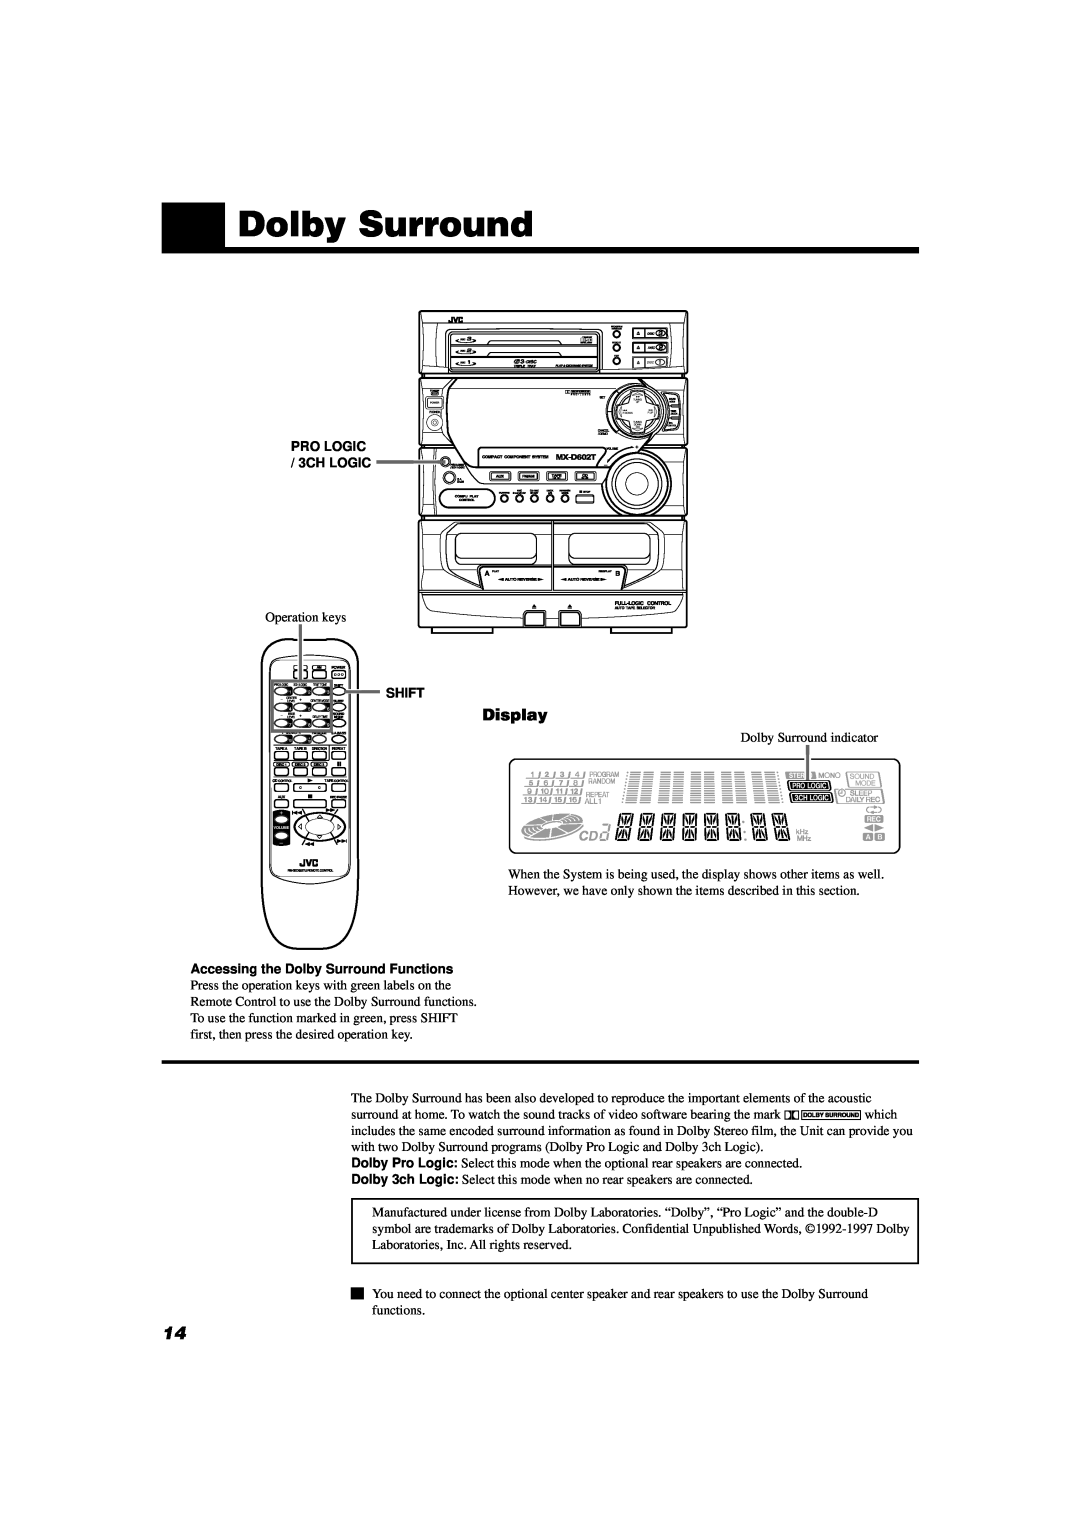 JVC MX-D602T manual Display, PRO LOGIC 3CH LOGIC, Shift, Accessing the Dolby Surround Functions 